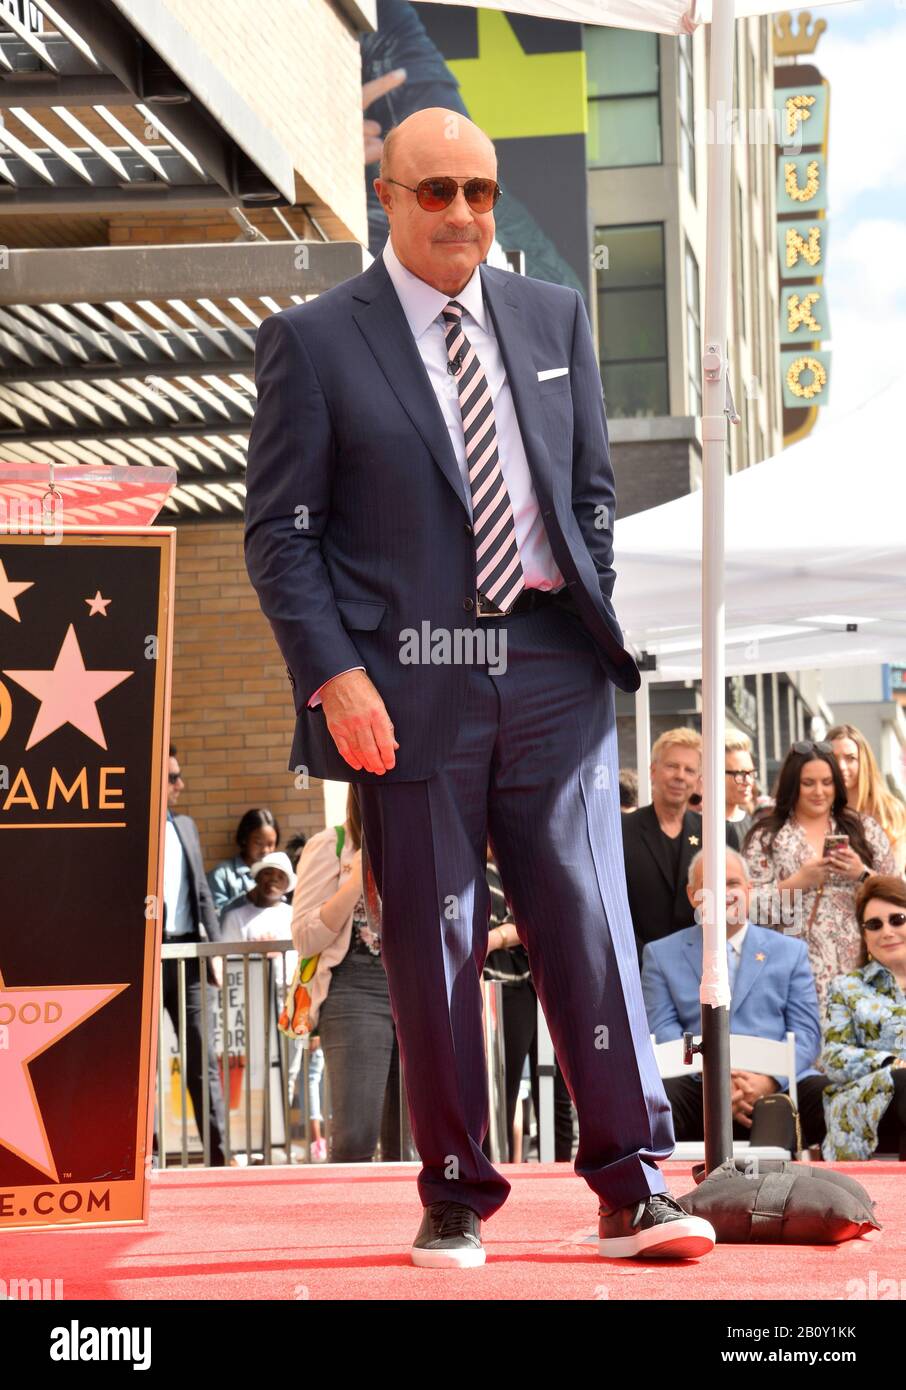 Los Angeles, USA. 21st Feb, 2020. LOS ANGELES, CA. February 21, 2020: Dr. Phil McGraw at the Hollywood Walk of Fame Star Ceremony honoring Dr Phil McGraw. Pictures Credit: Paul Smith/Alamy Live News Stock Photo